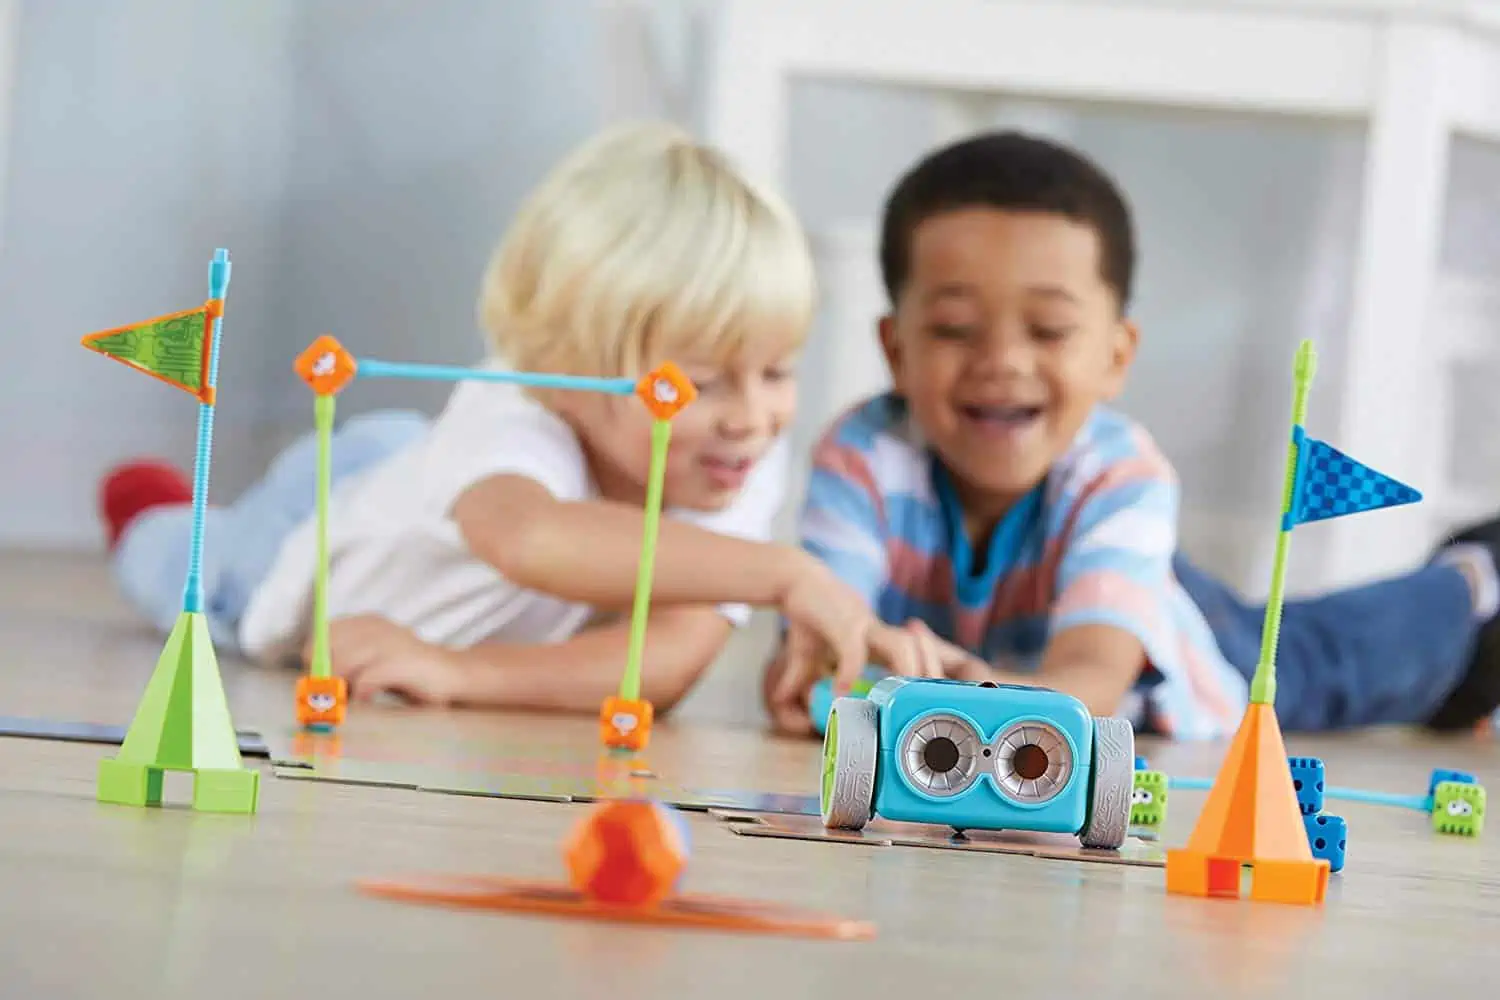 Two boys playing with toys found on Amazon prime.